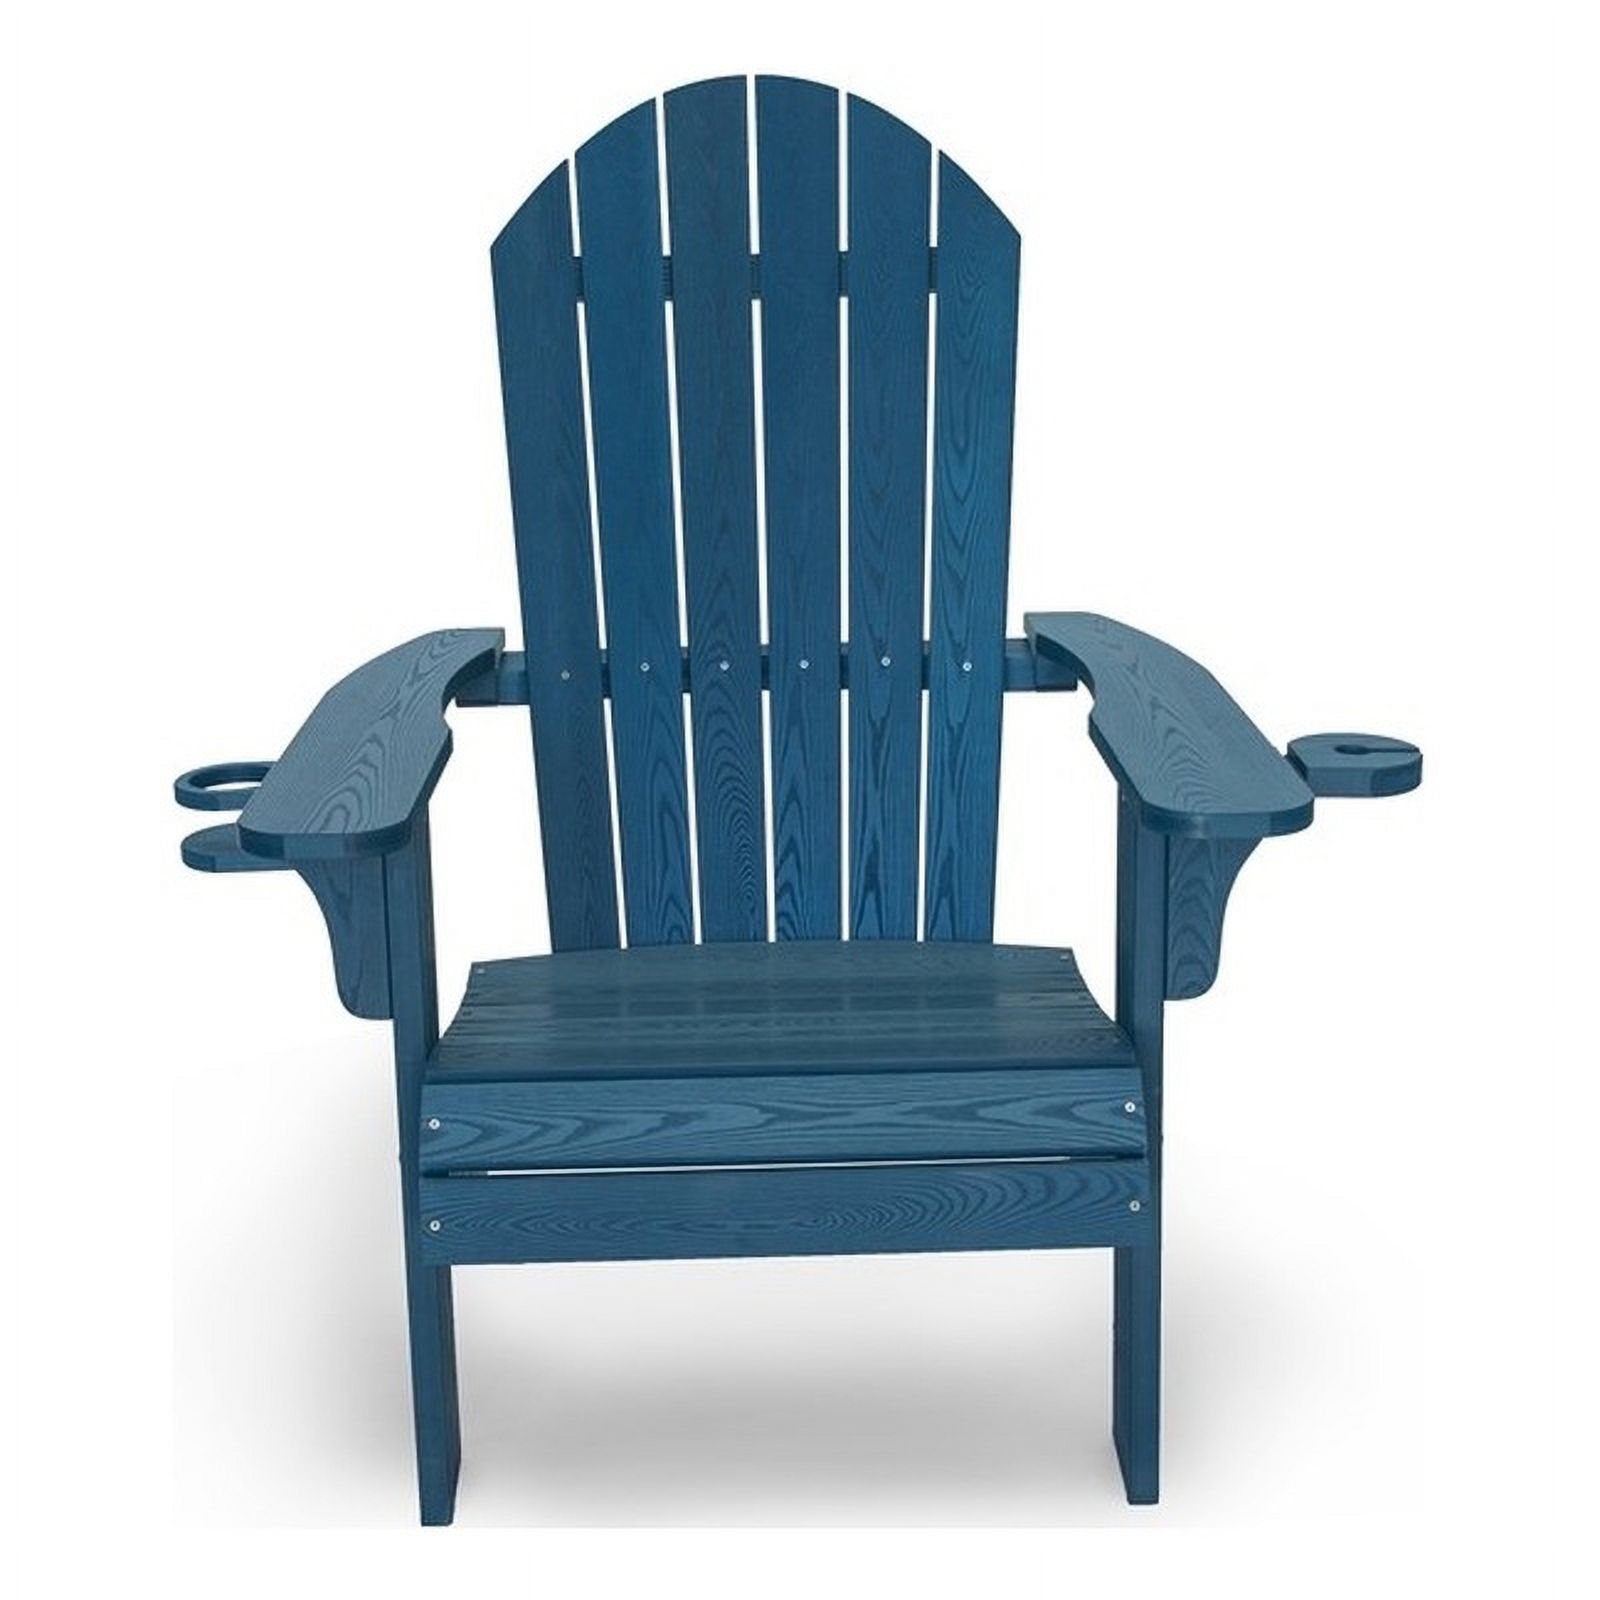 Westwood Navy All Weather Outdoor Patio Adirondack Chair - image 2 of 11